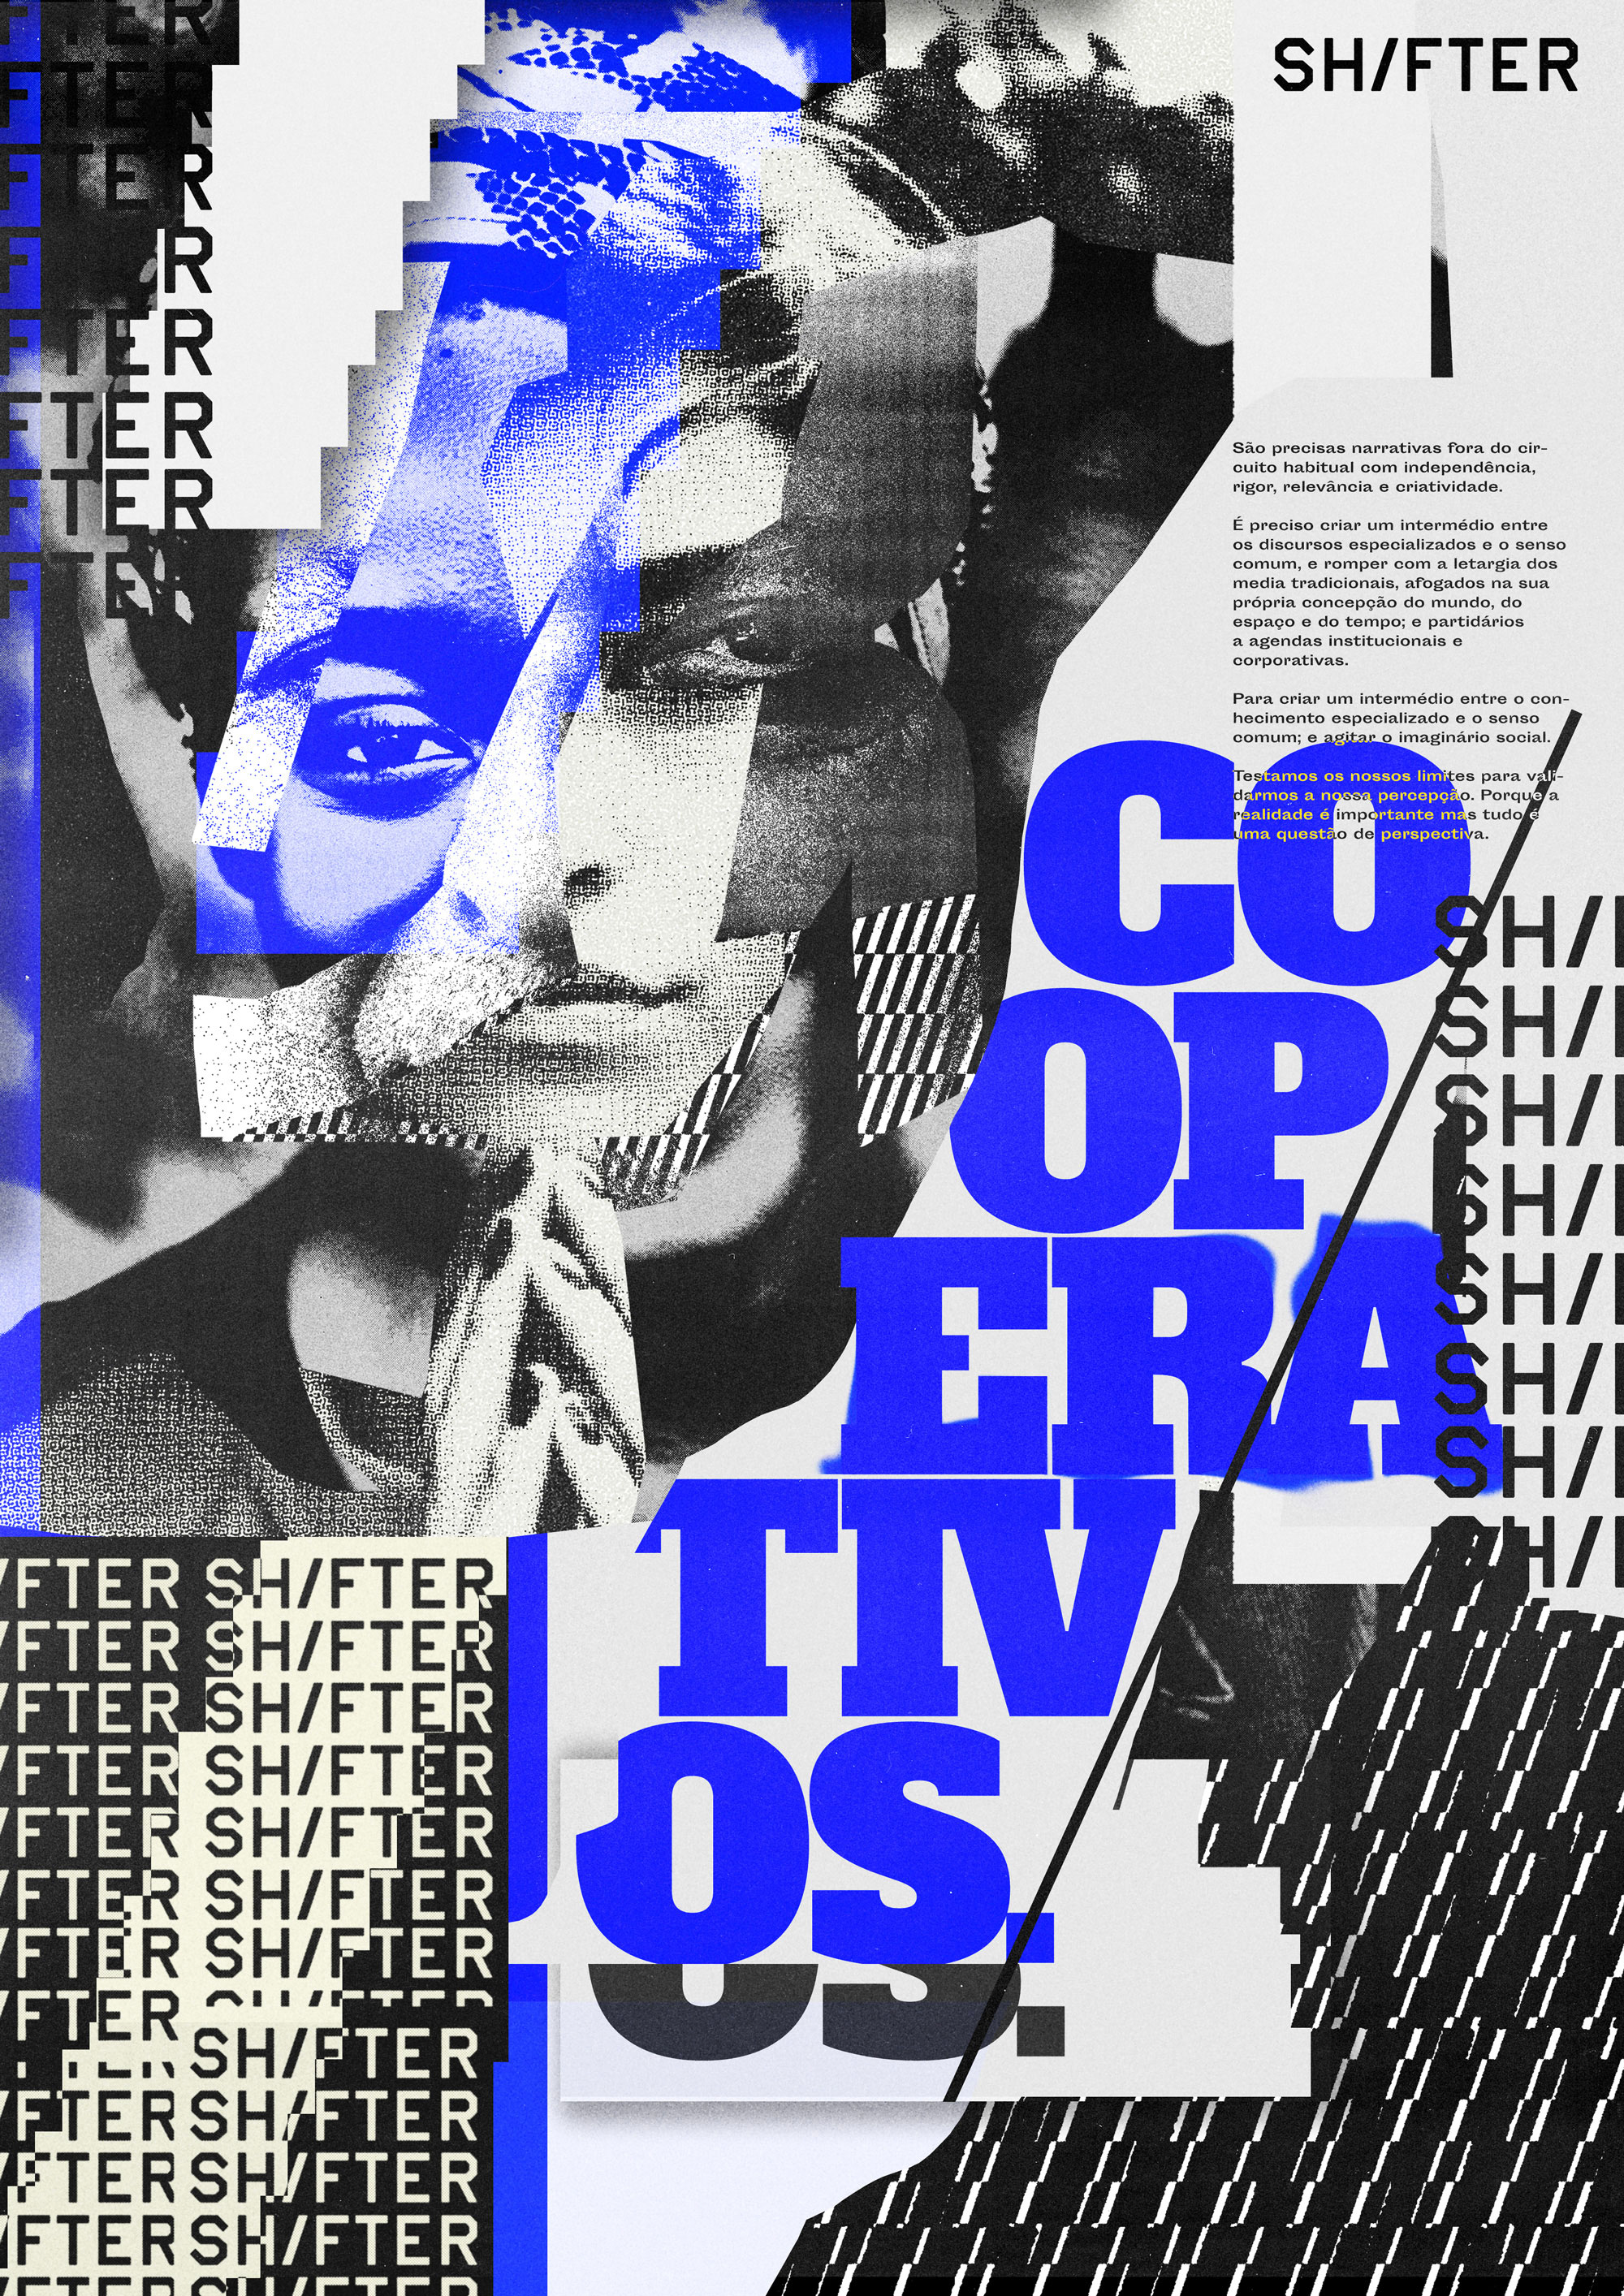 Shifter Cooperative Poster